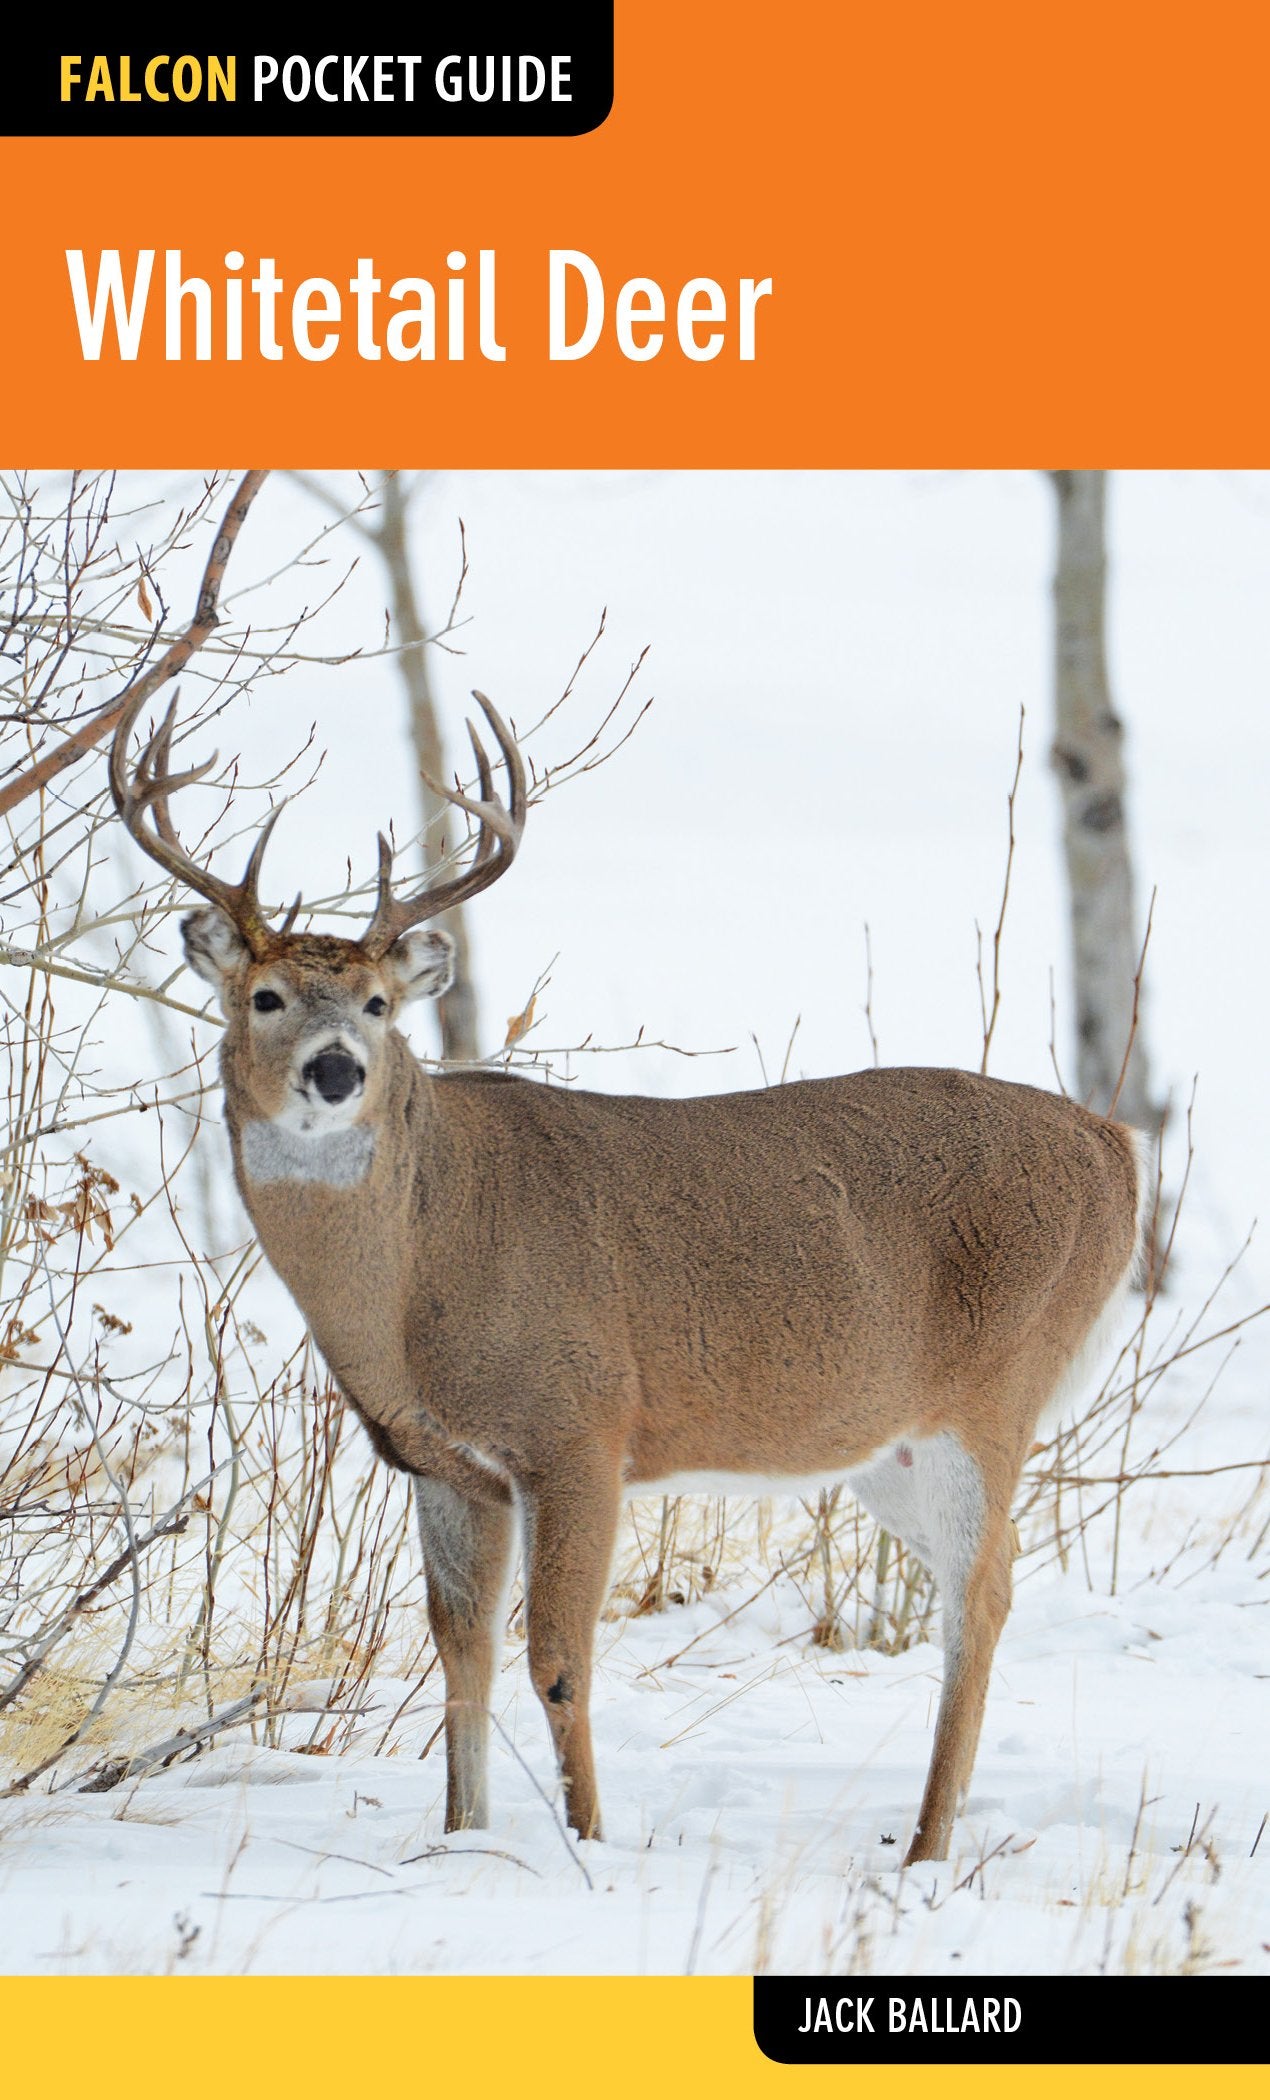 Bookstore　(Falcon　Whitetail　Deer　Natural　Pocket　–　Guides　Series)　Resources　Map